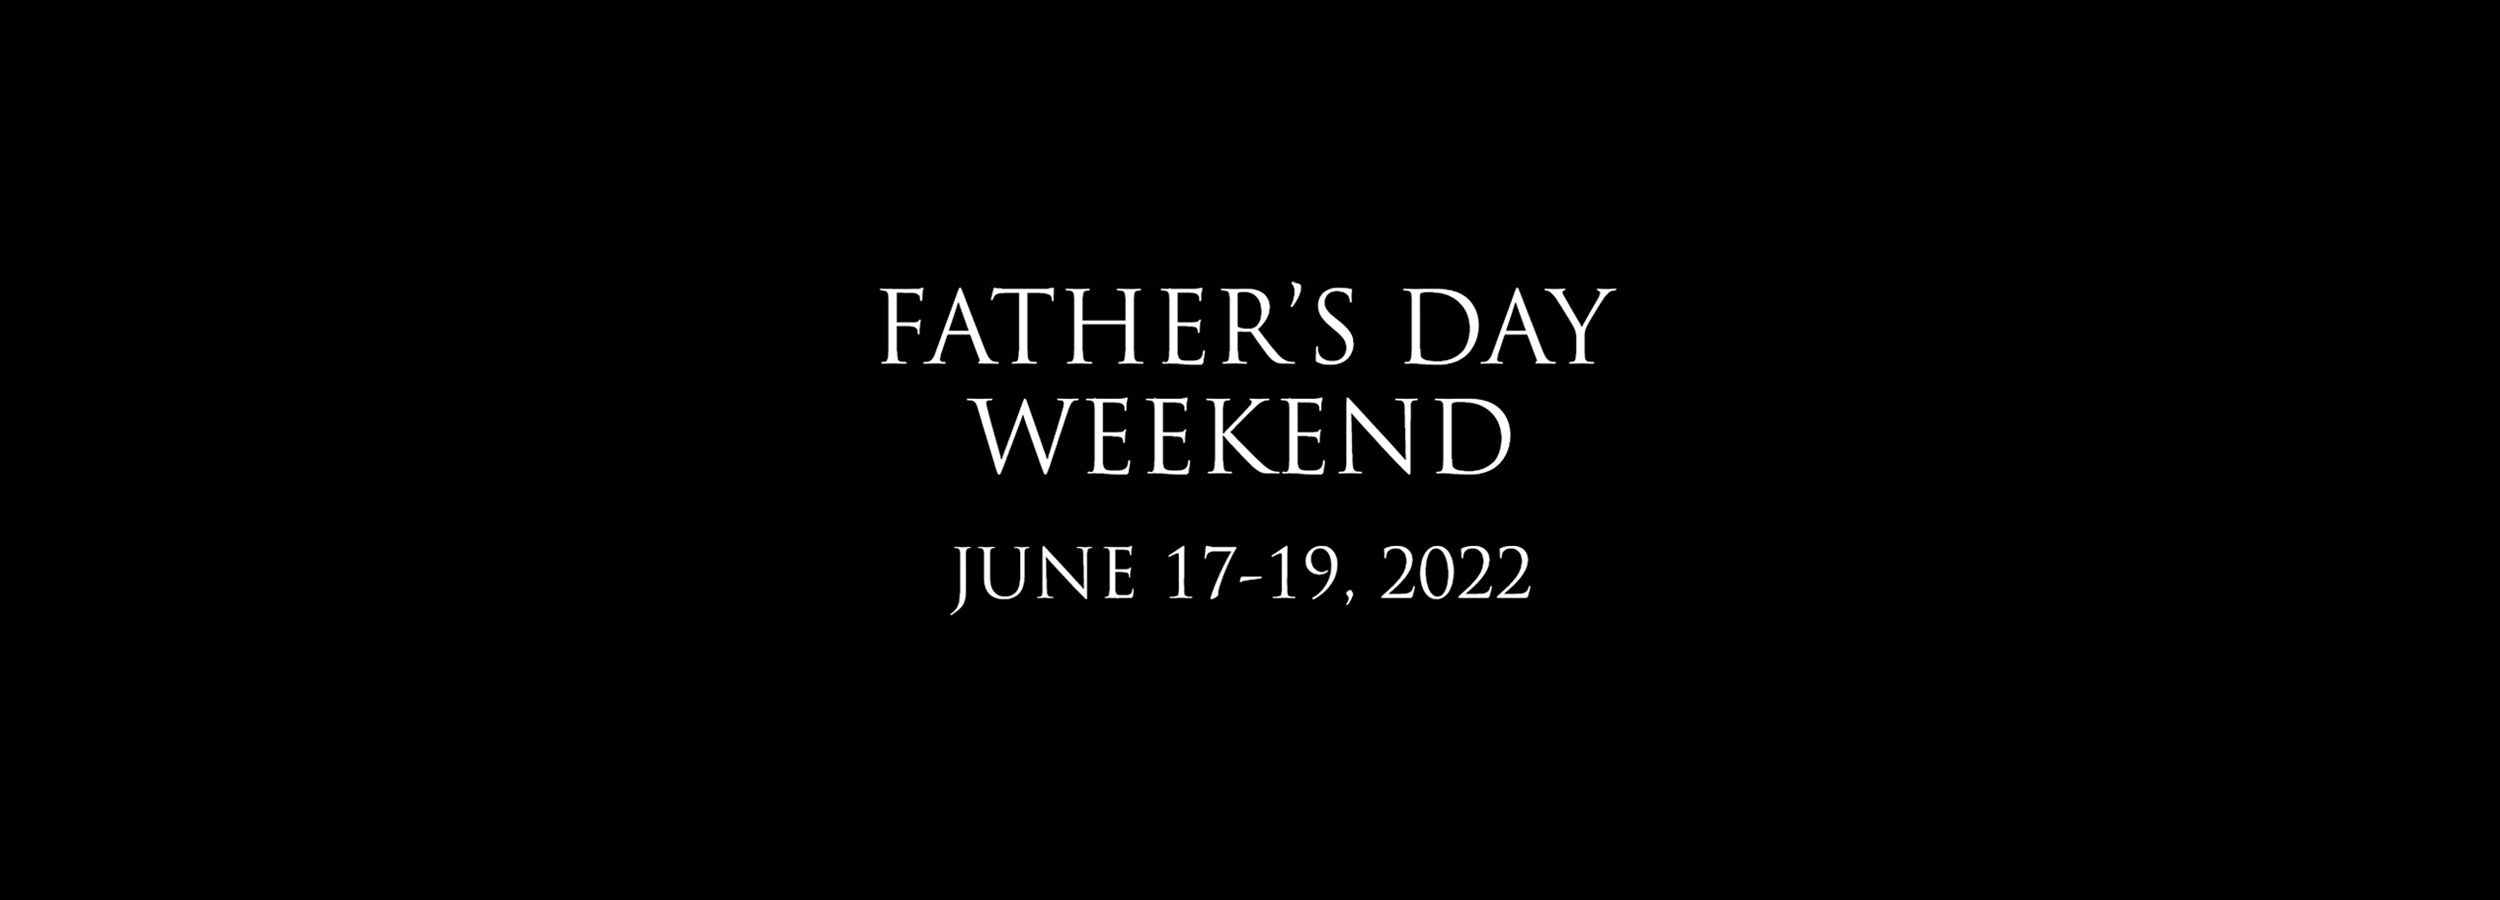 Father's Day Weekend banner